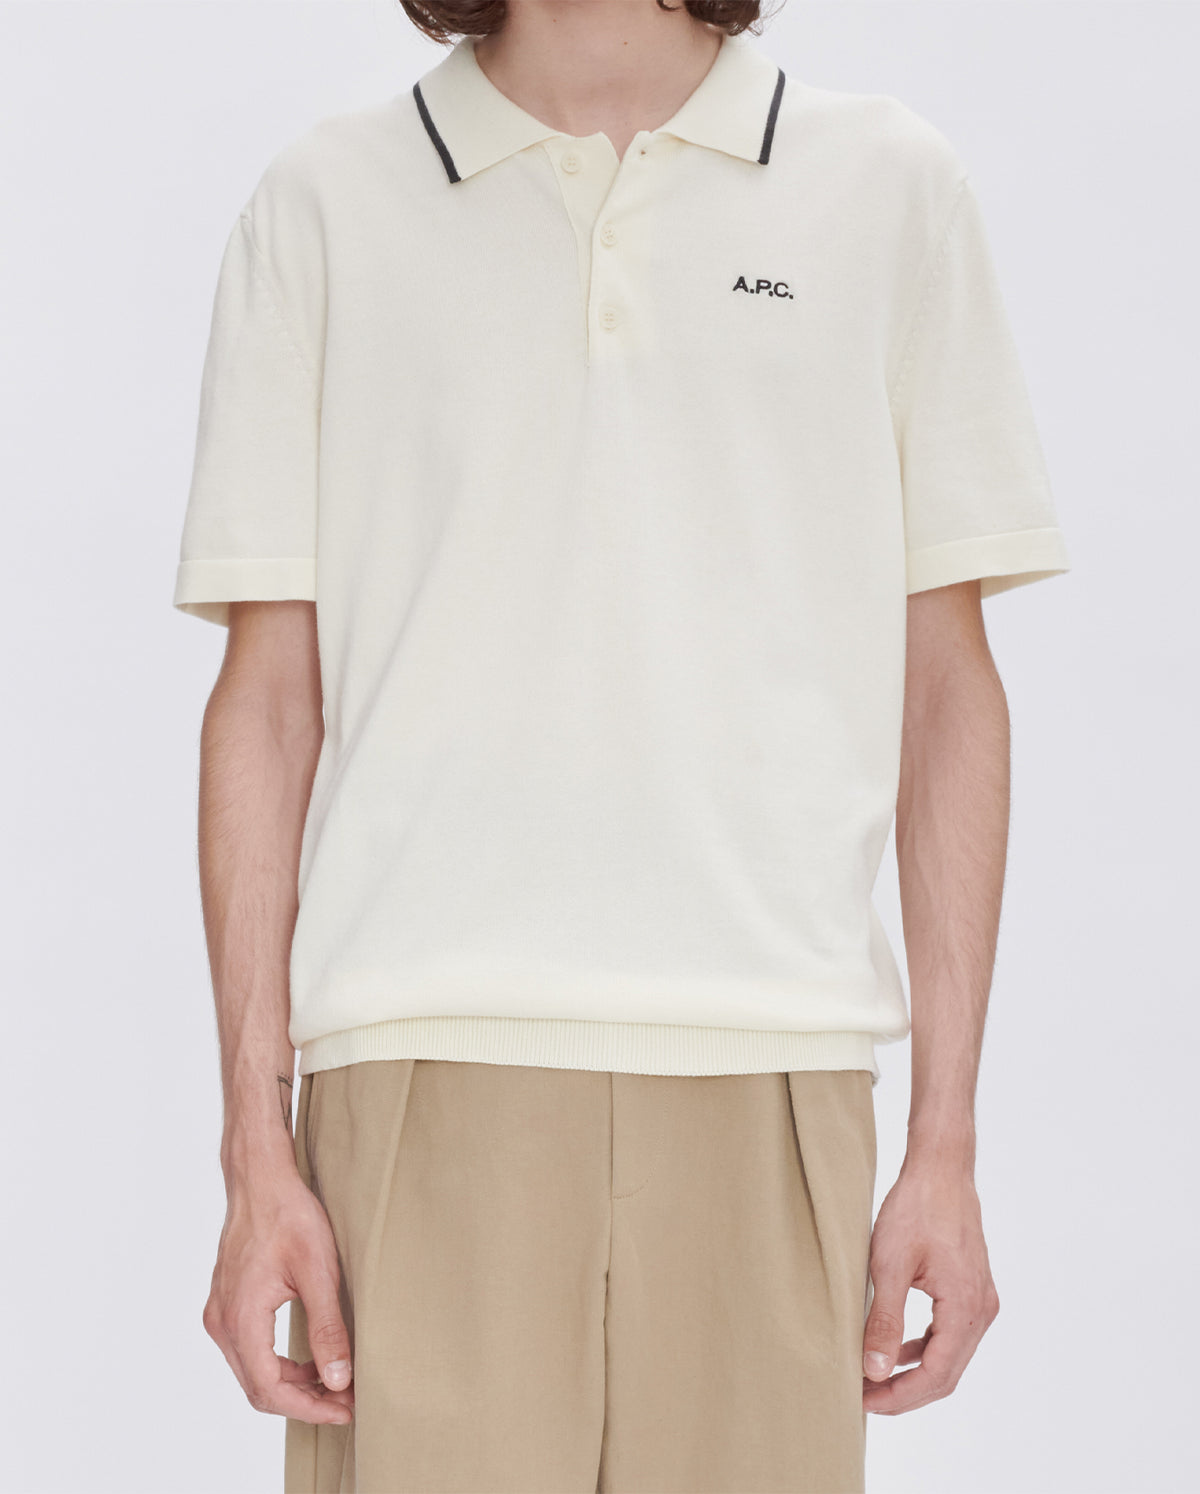 Polo Flynn With Chest Logo - White